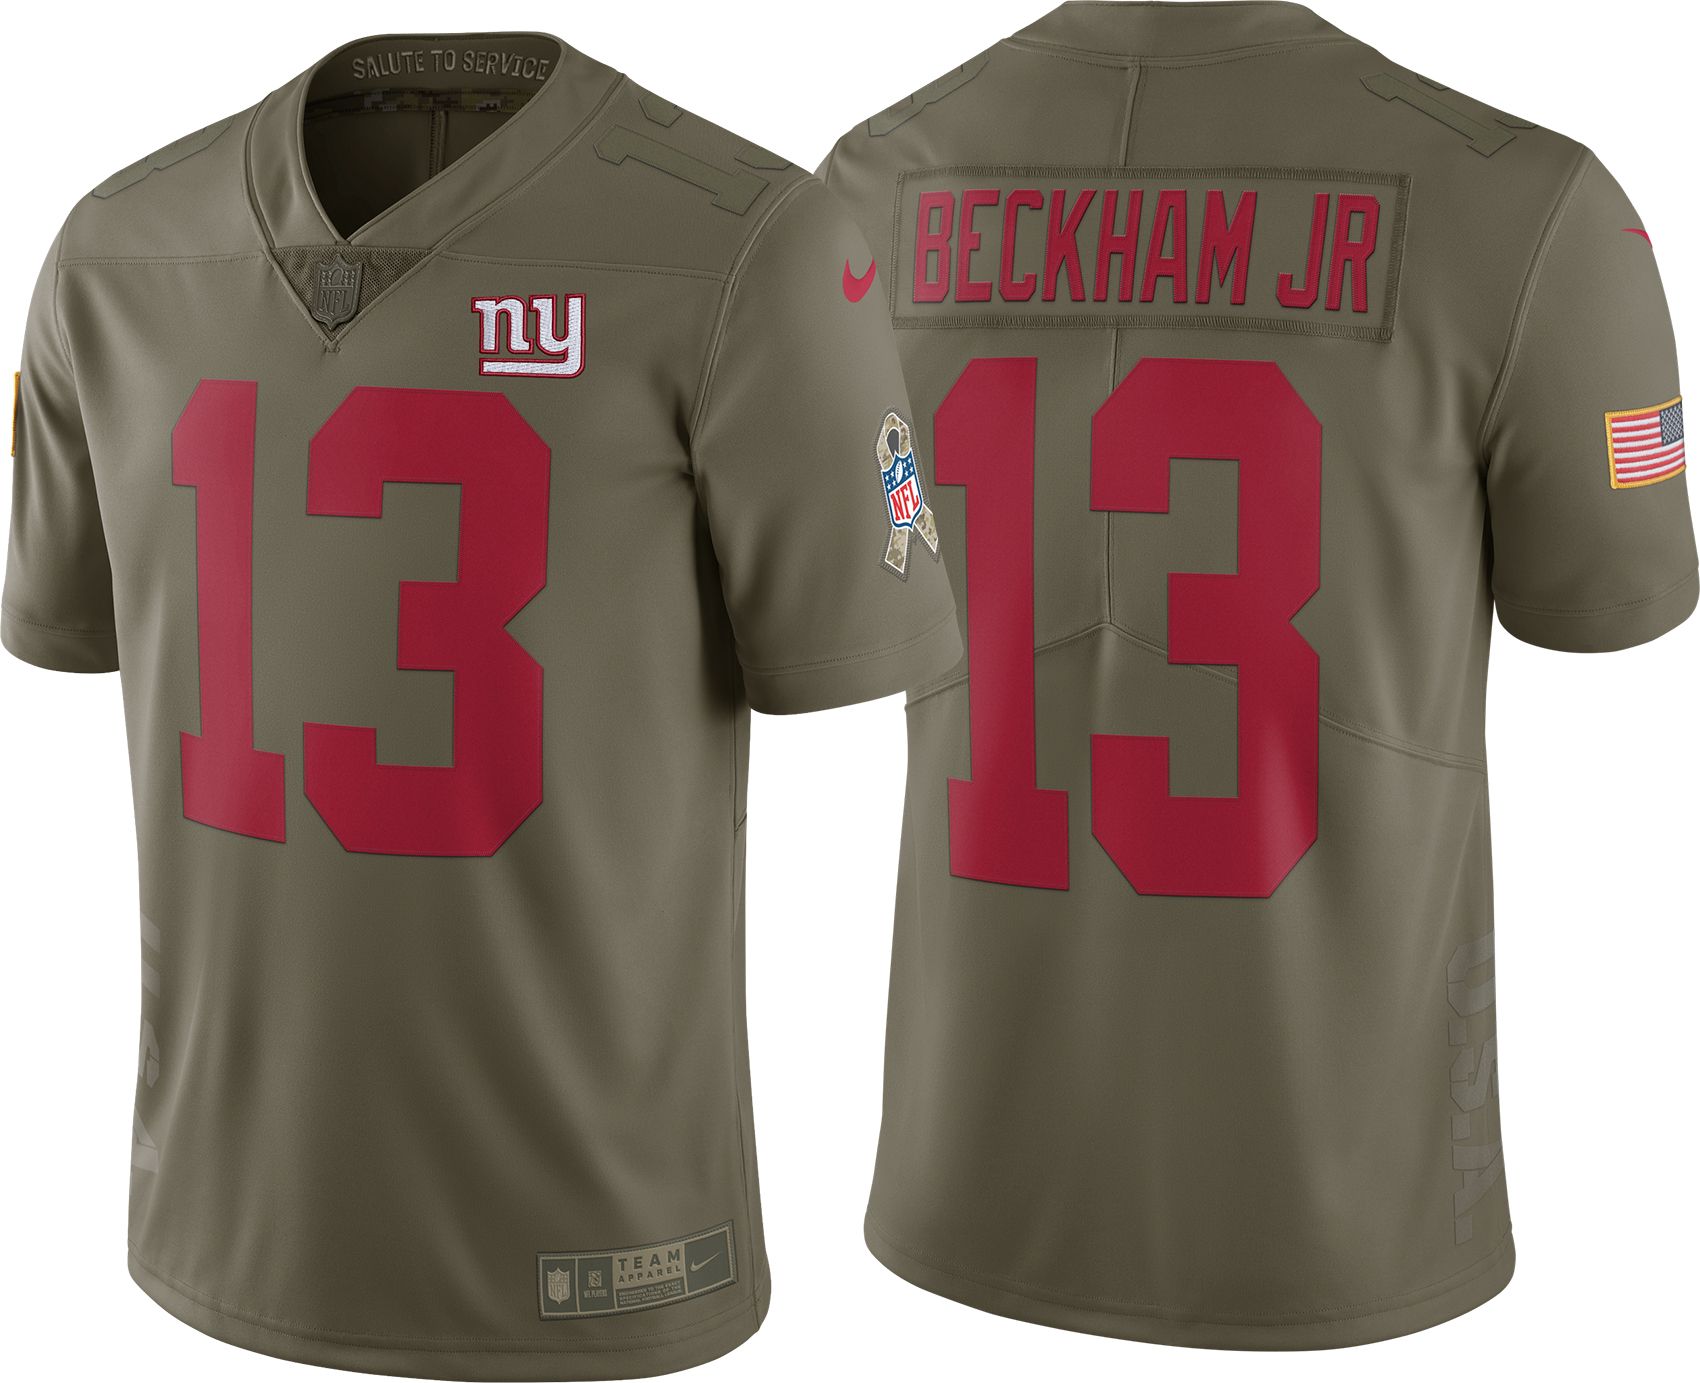 nfl salute to the troops jersey